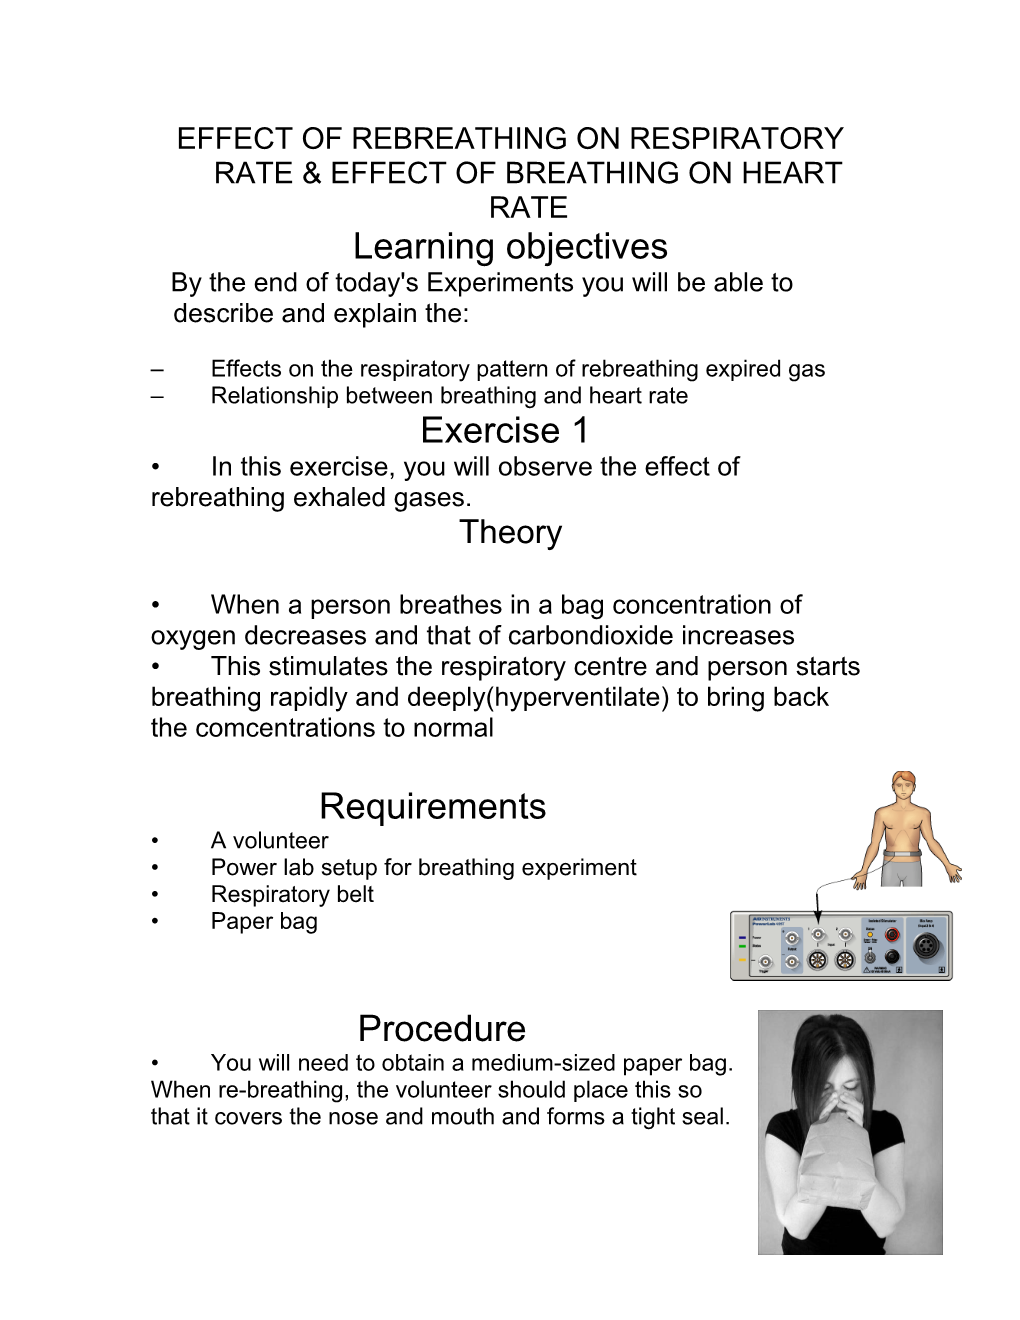 Effect of Rebreathing on Respiratory Rate & Effect of Breathing on Heart Rate